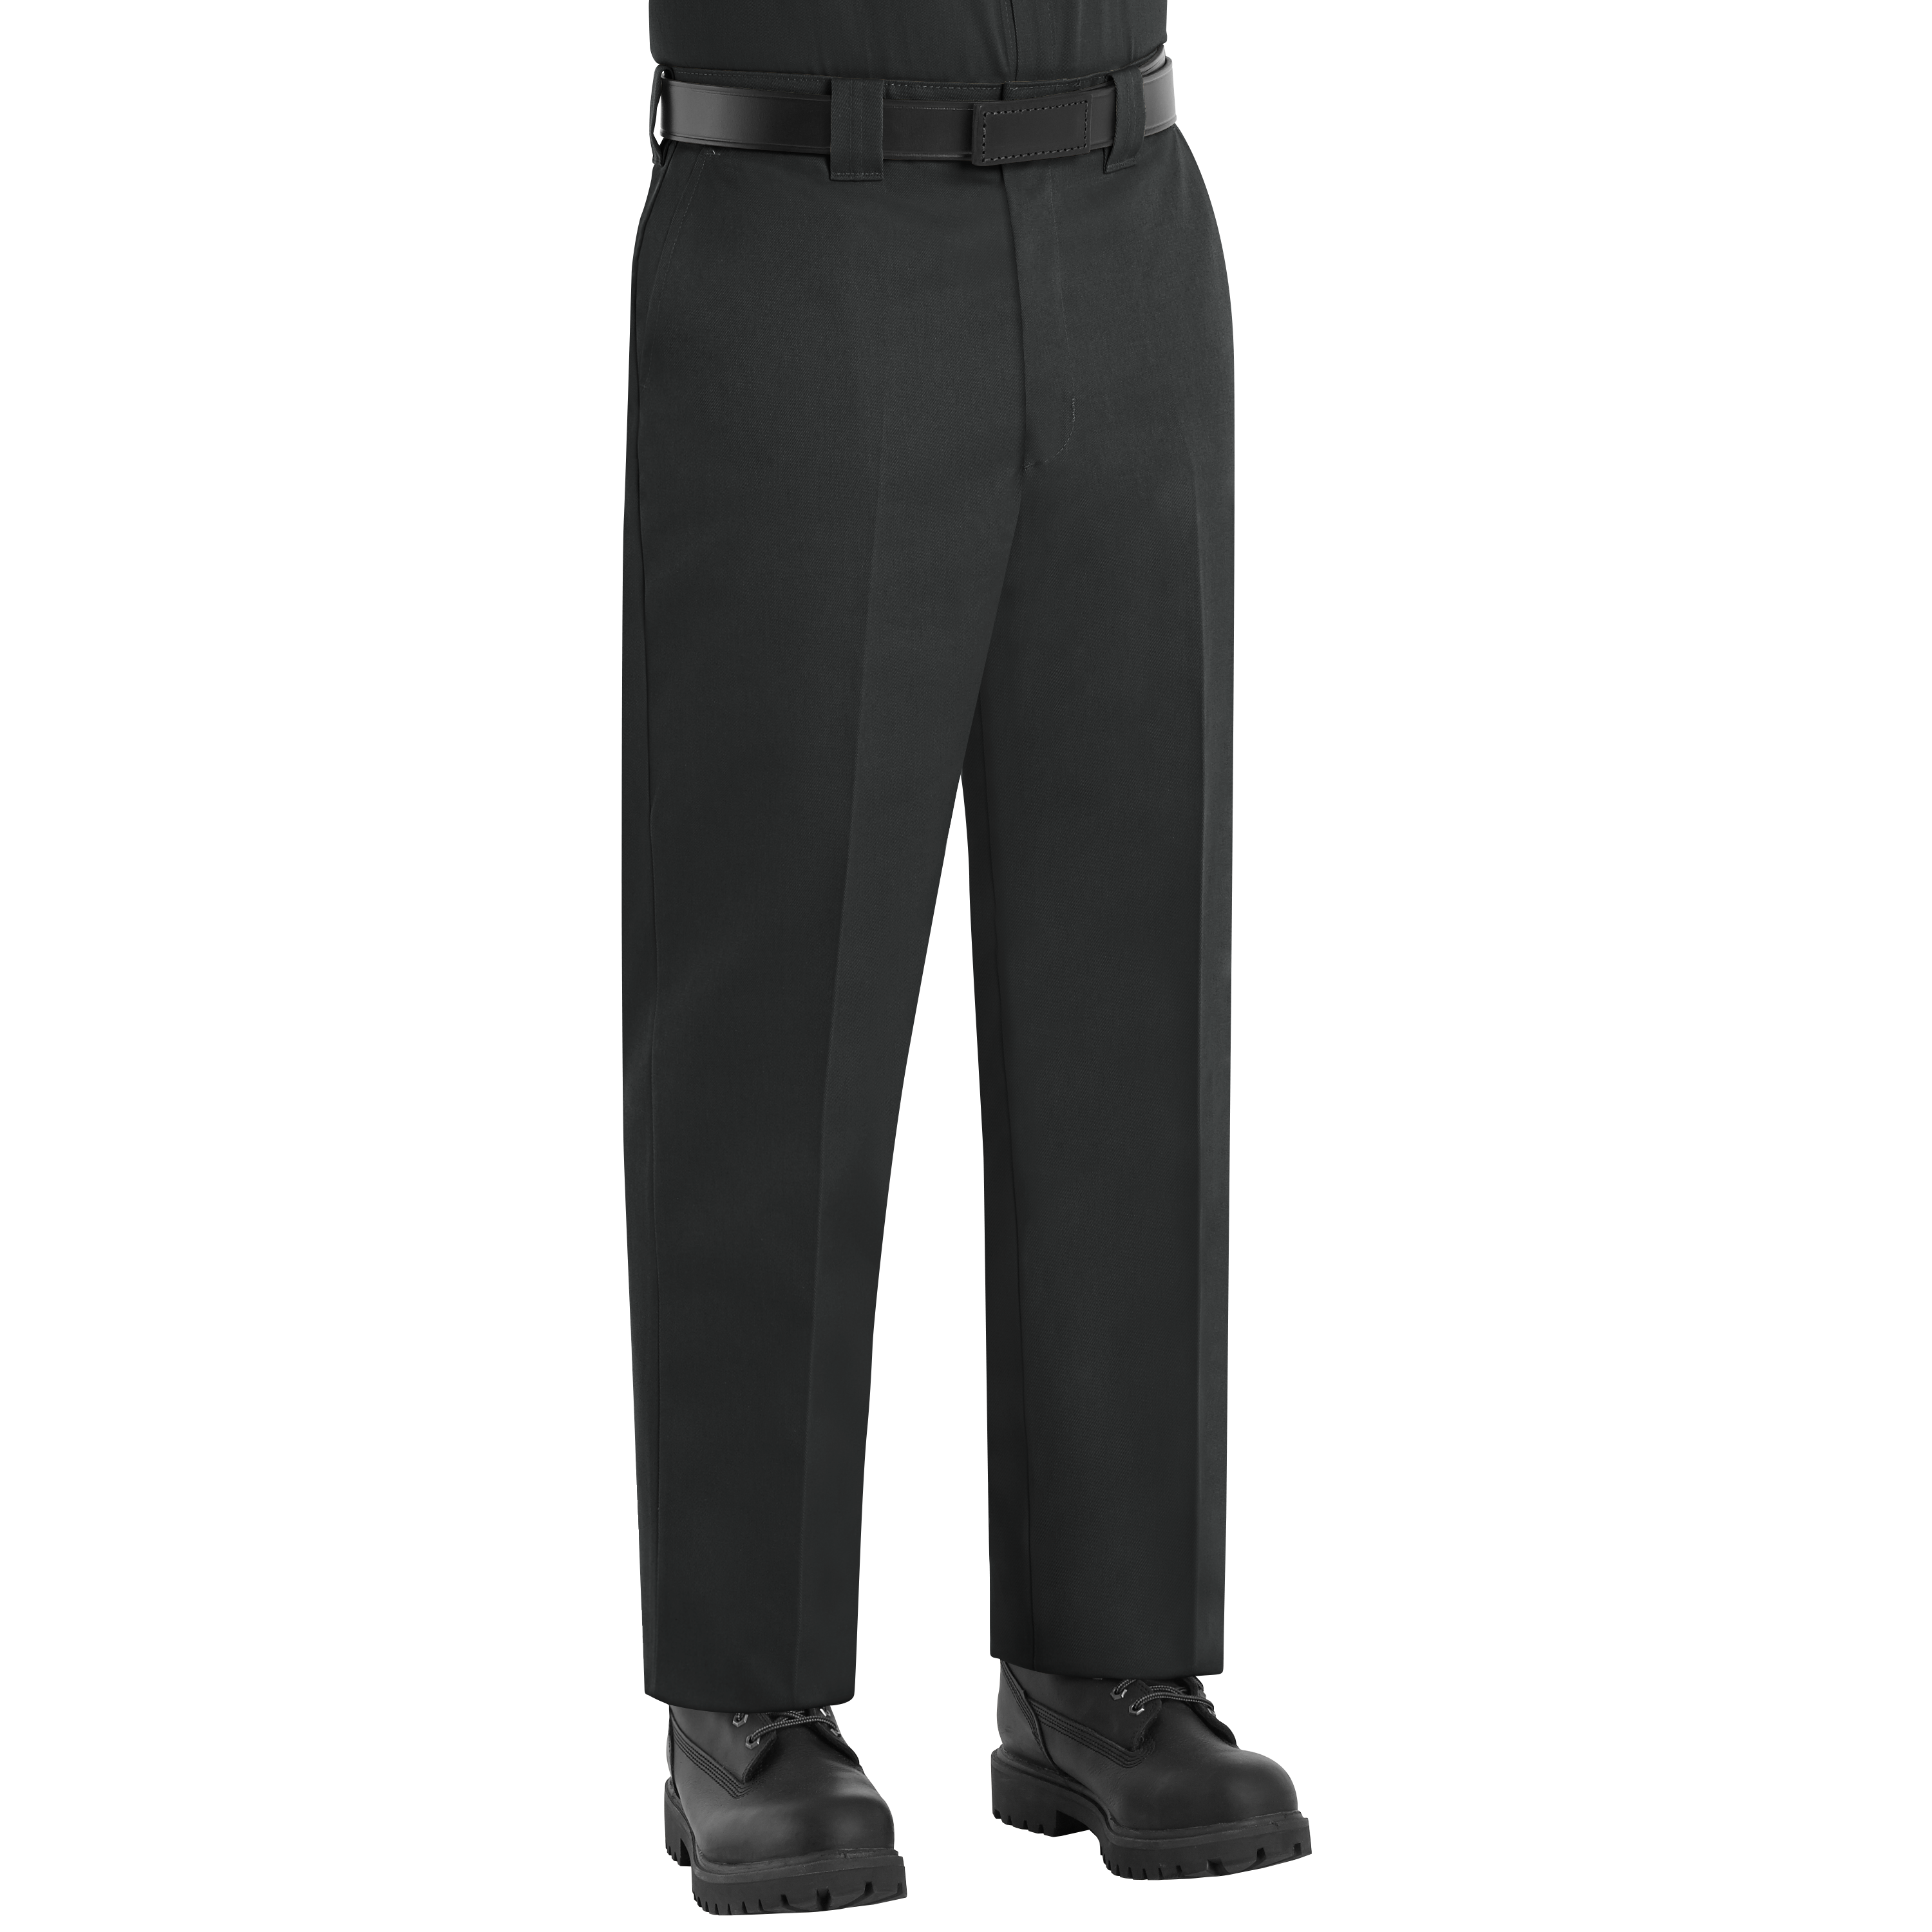 Mens Industrial Workwear Pants, Shorts & Jeans | Uniform for Work - Pants,  Shorts & Jeans | Dickies® B2B